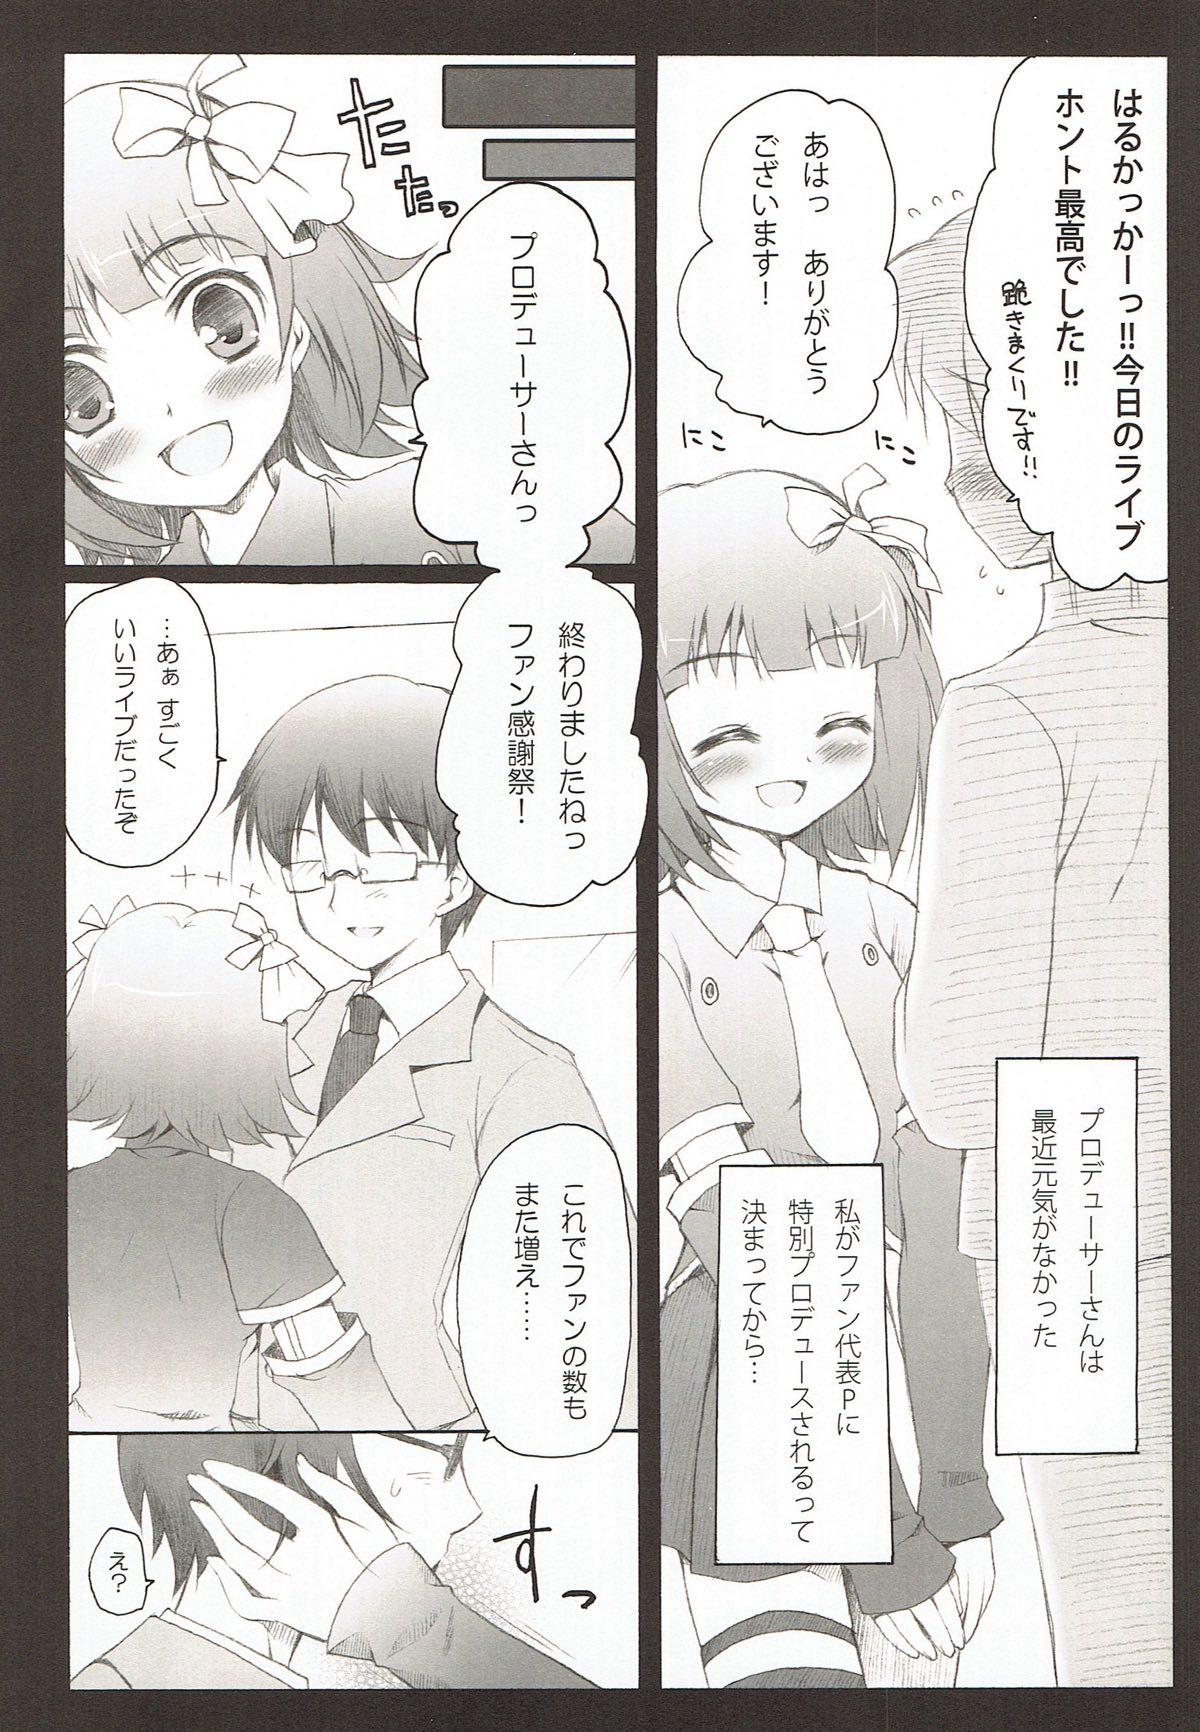 Clip remindfull - The idolmaster Goldenshower - Page 3